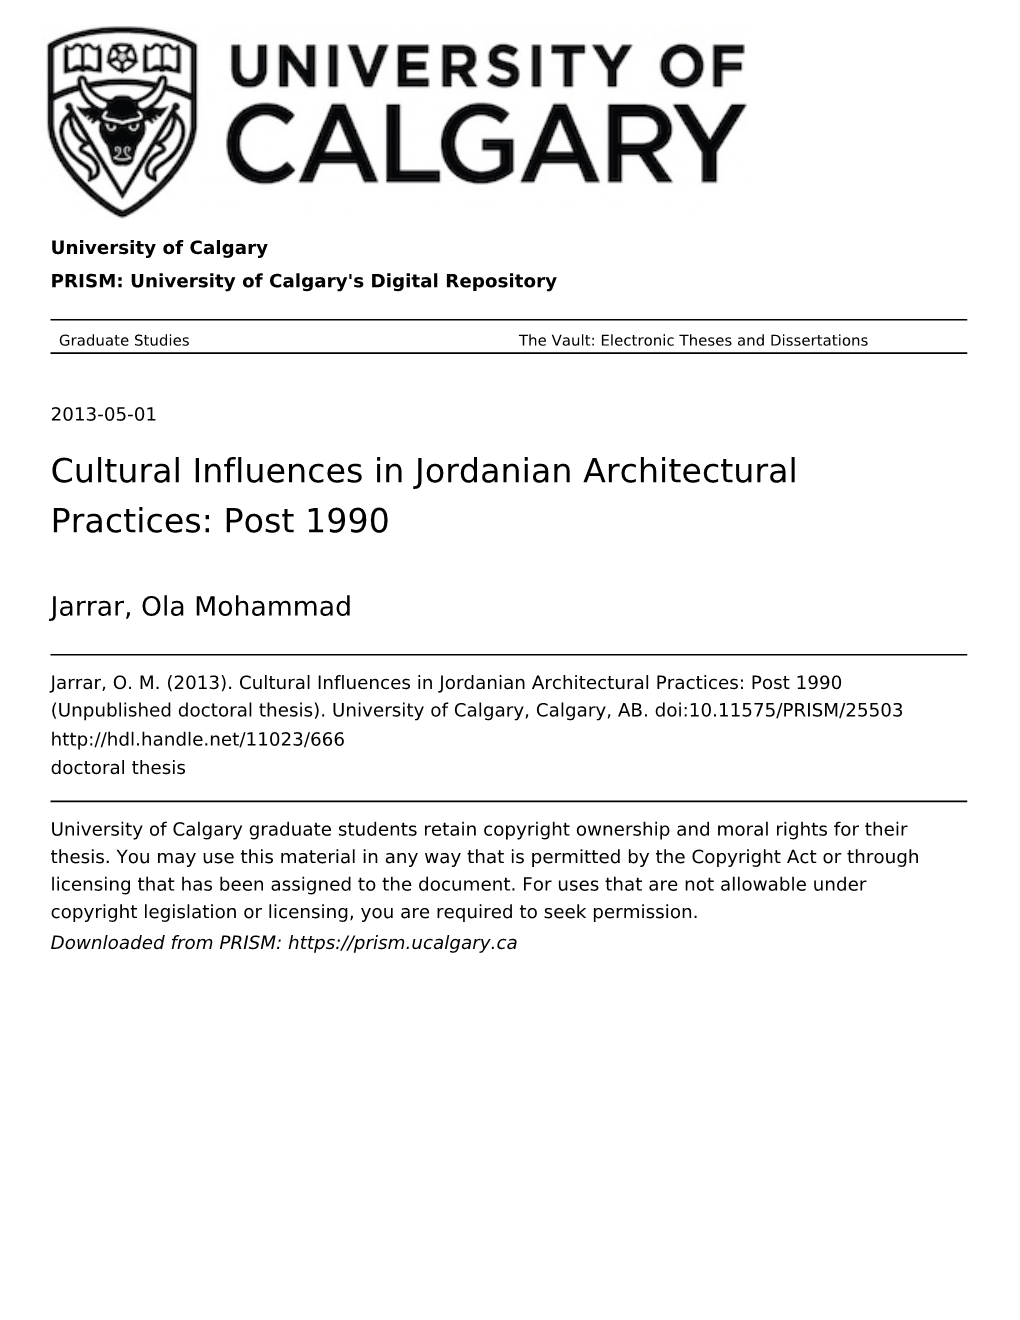 Cultural Influences in Jordanian Architectural Practices: Post 1990